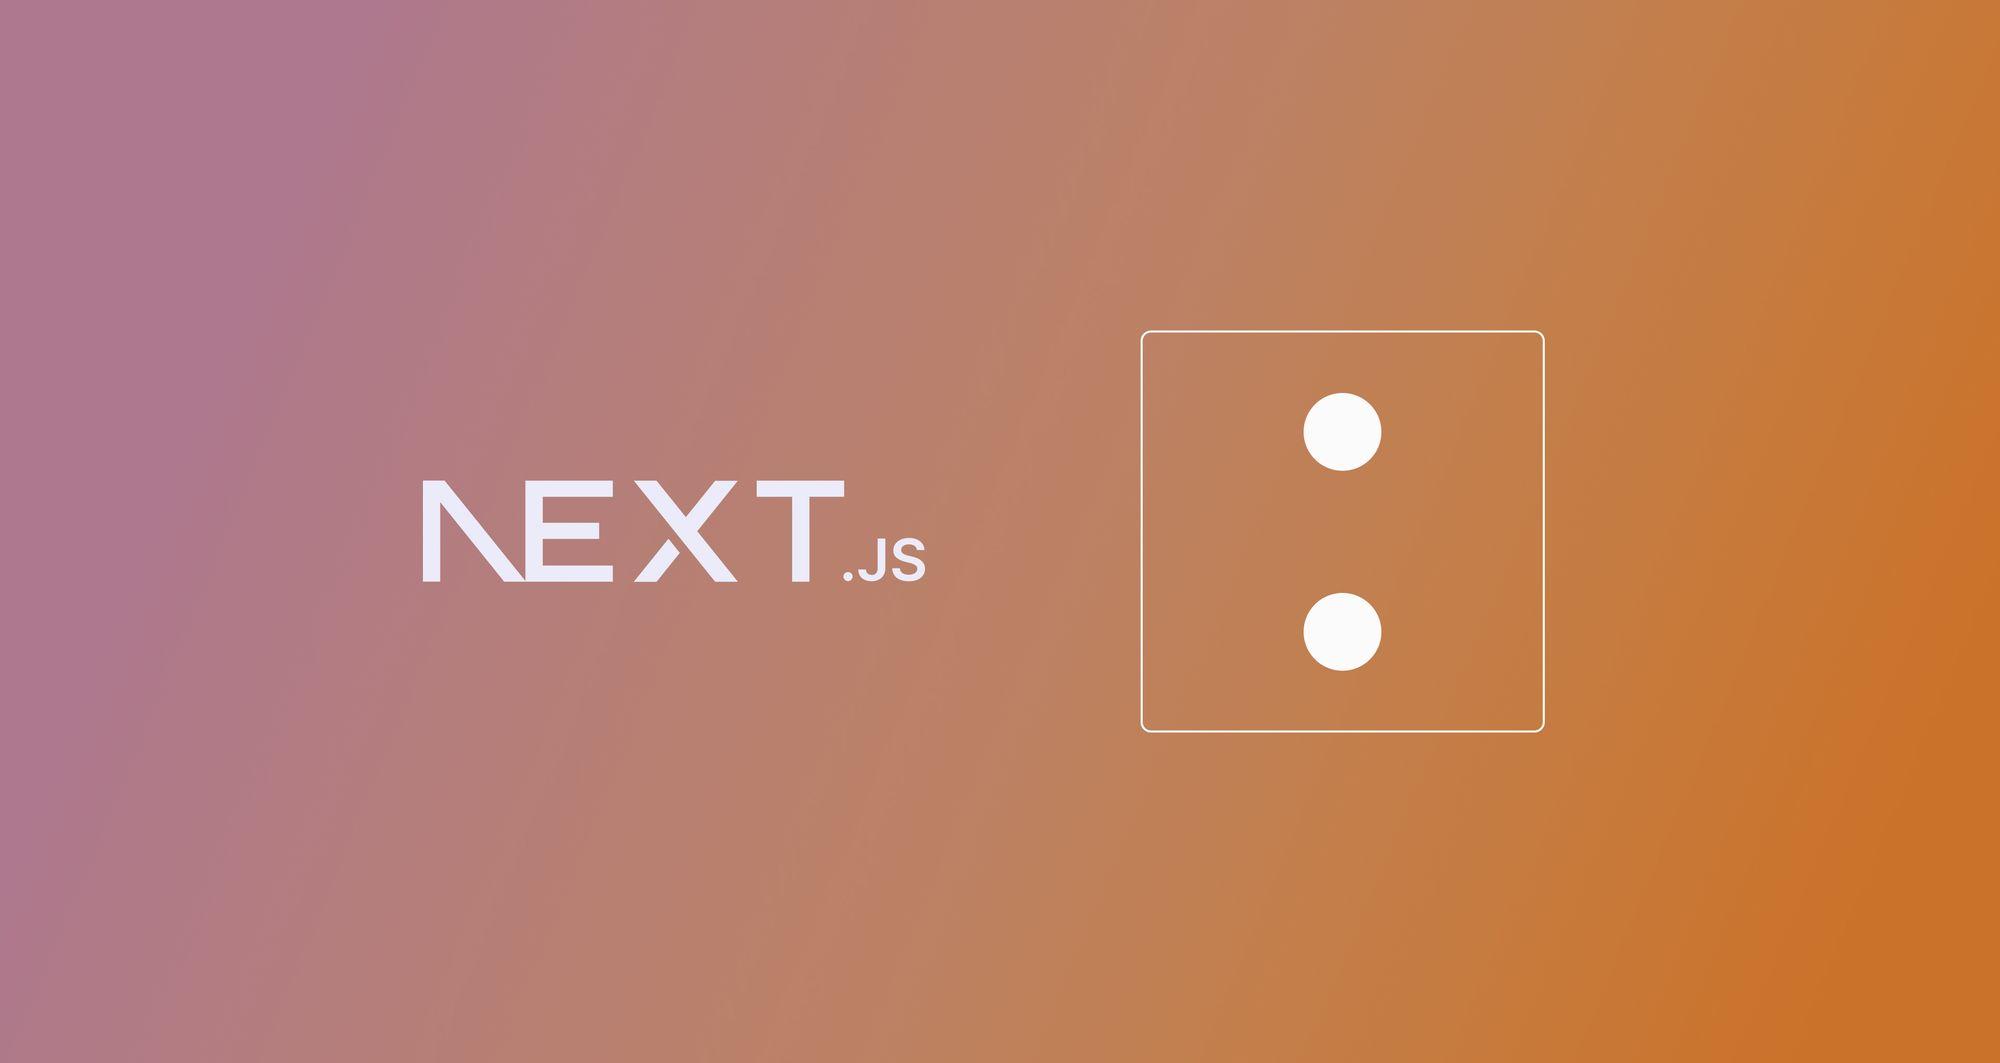 How To Add NLP And Language AI To Your Next.js App